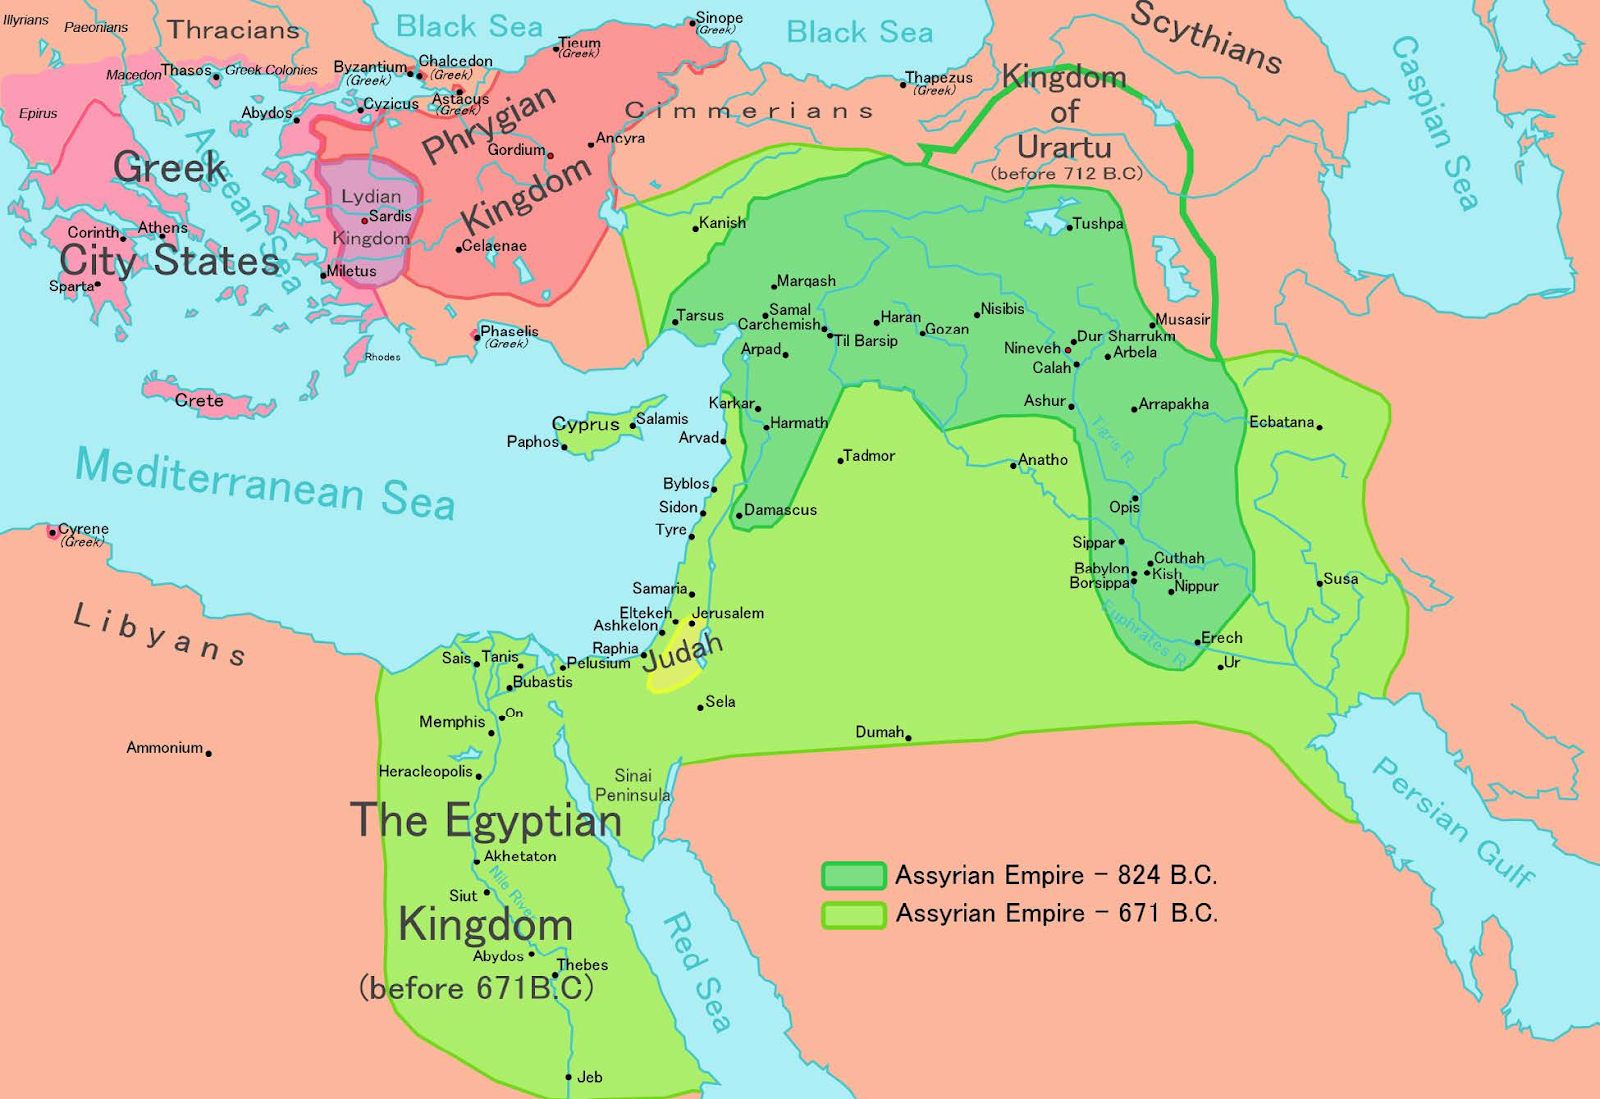 The Assyrian Empire at its height. | Author: User “Ningyou” | Source: Wikimedia Commons | License: Public Domain